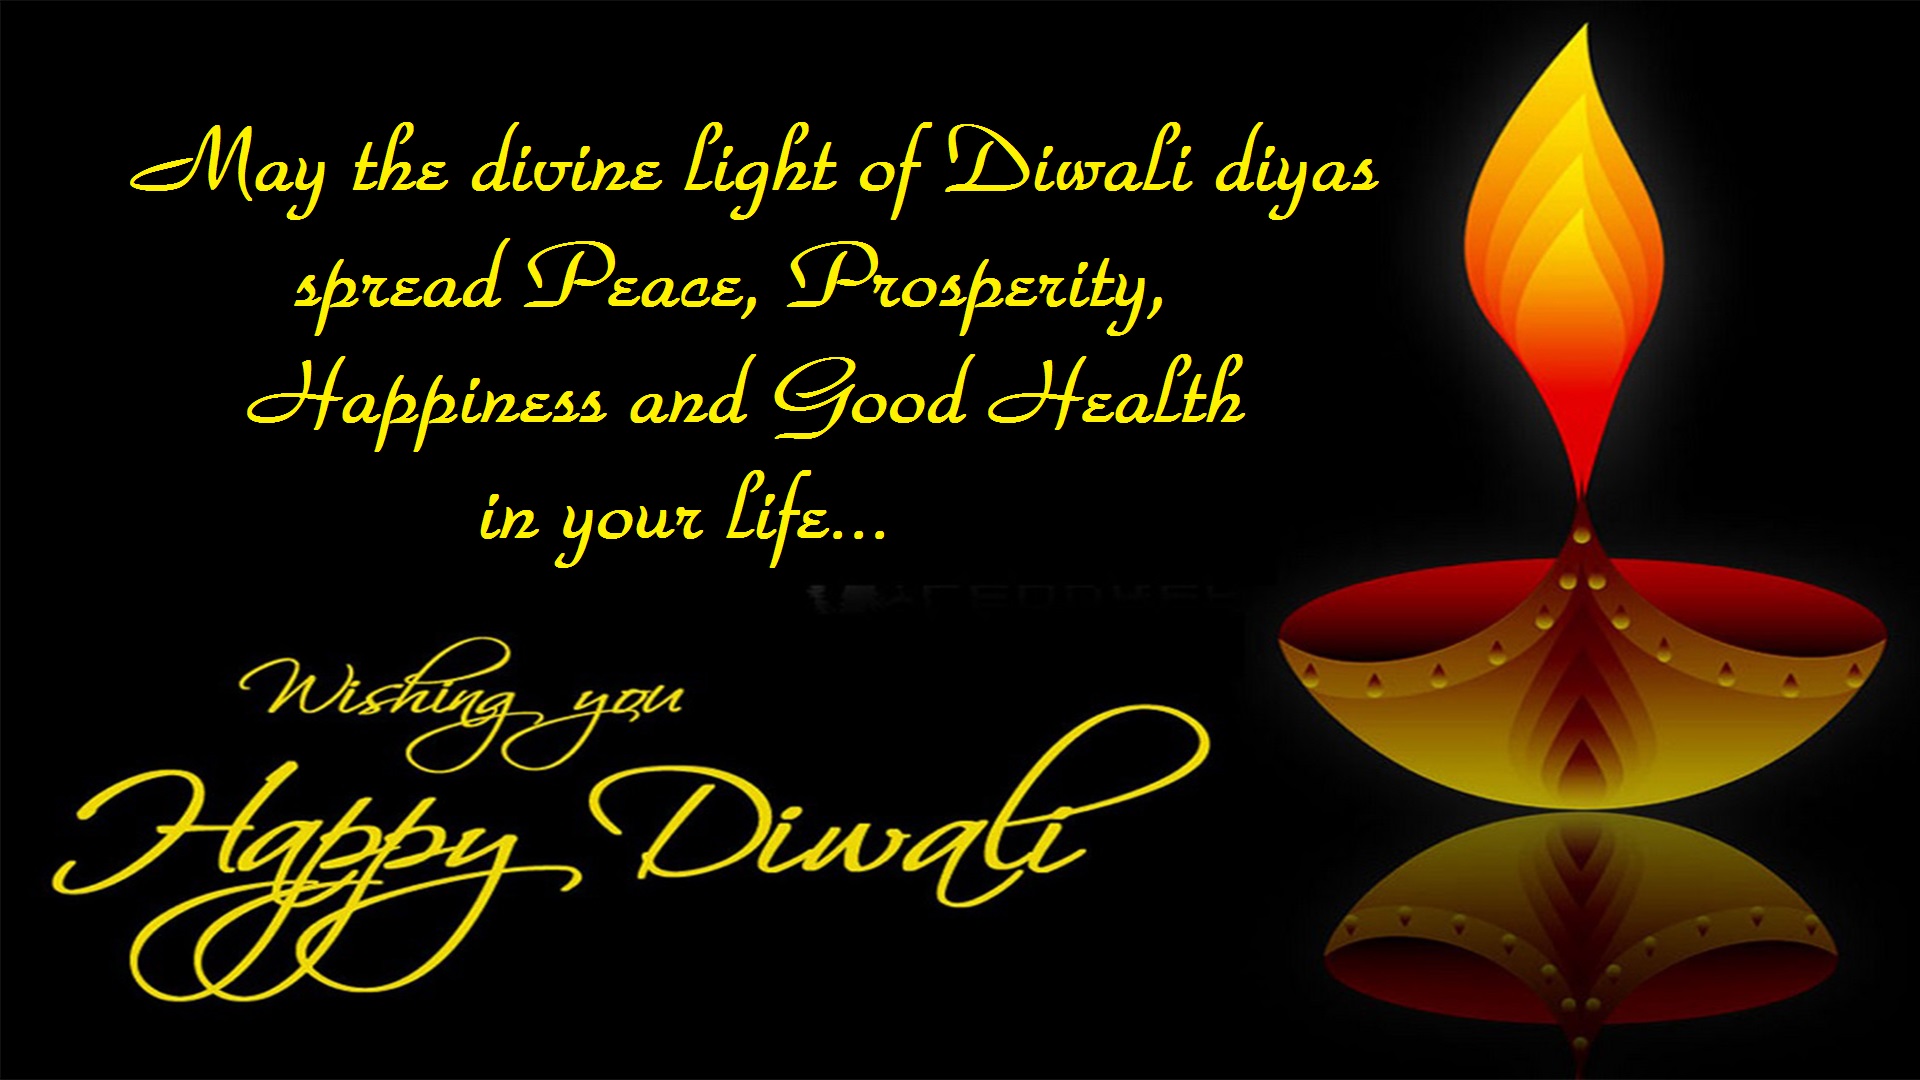 Happy Diwali Wishes, Greetings & Messages Images